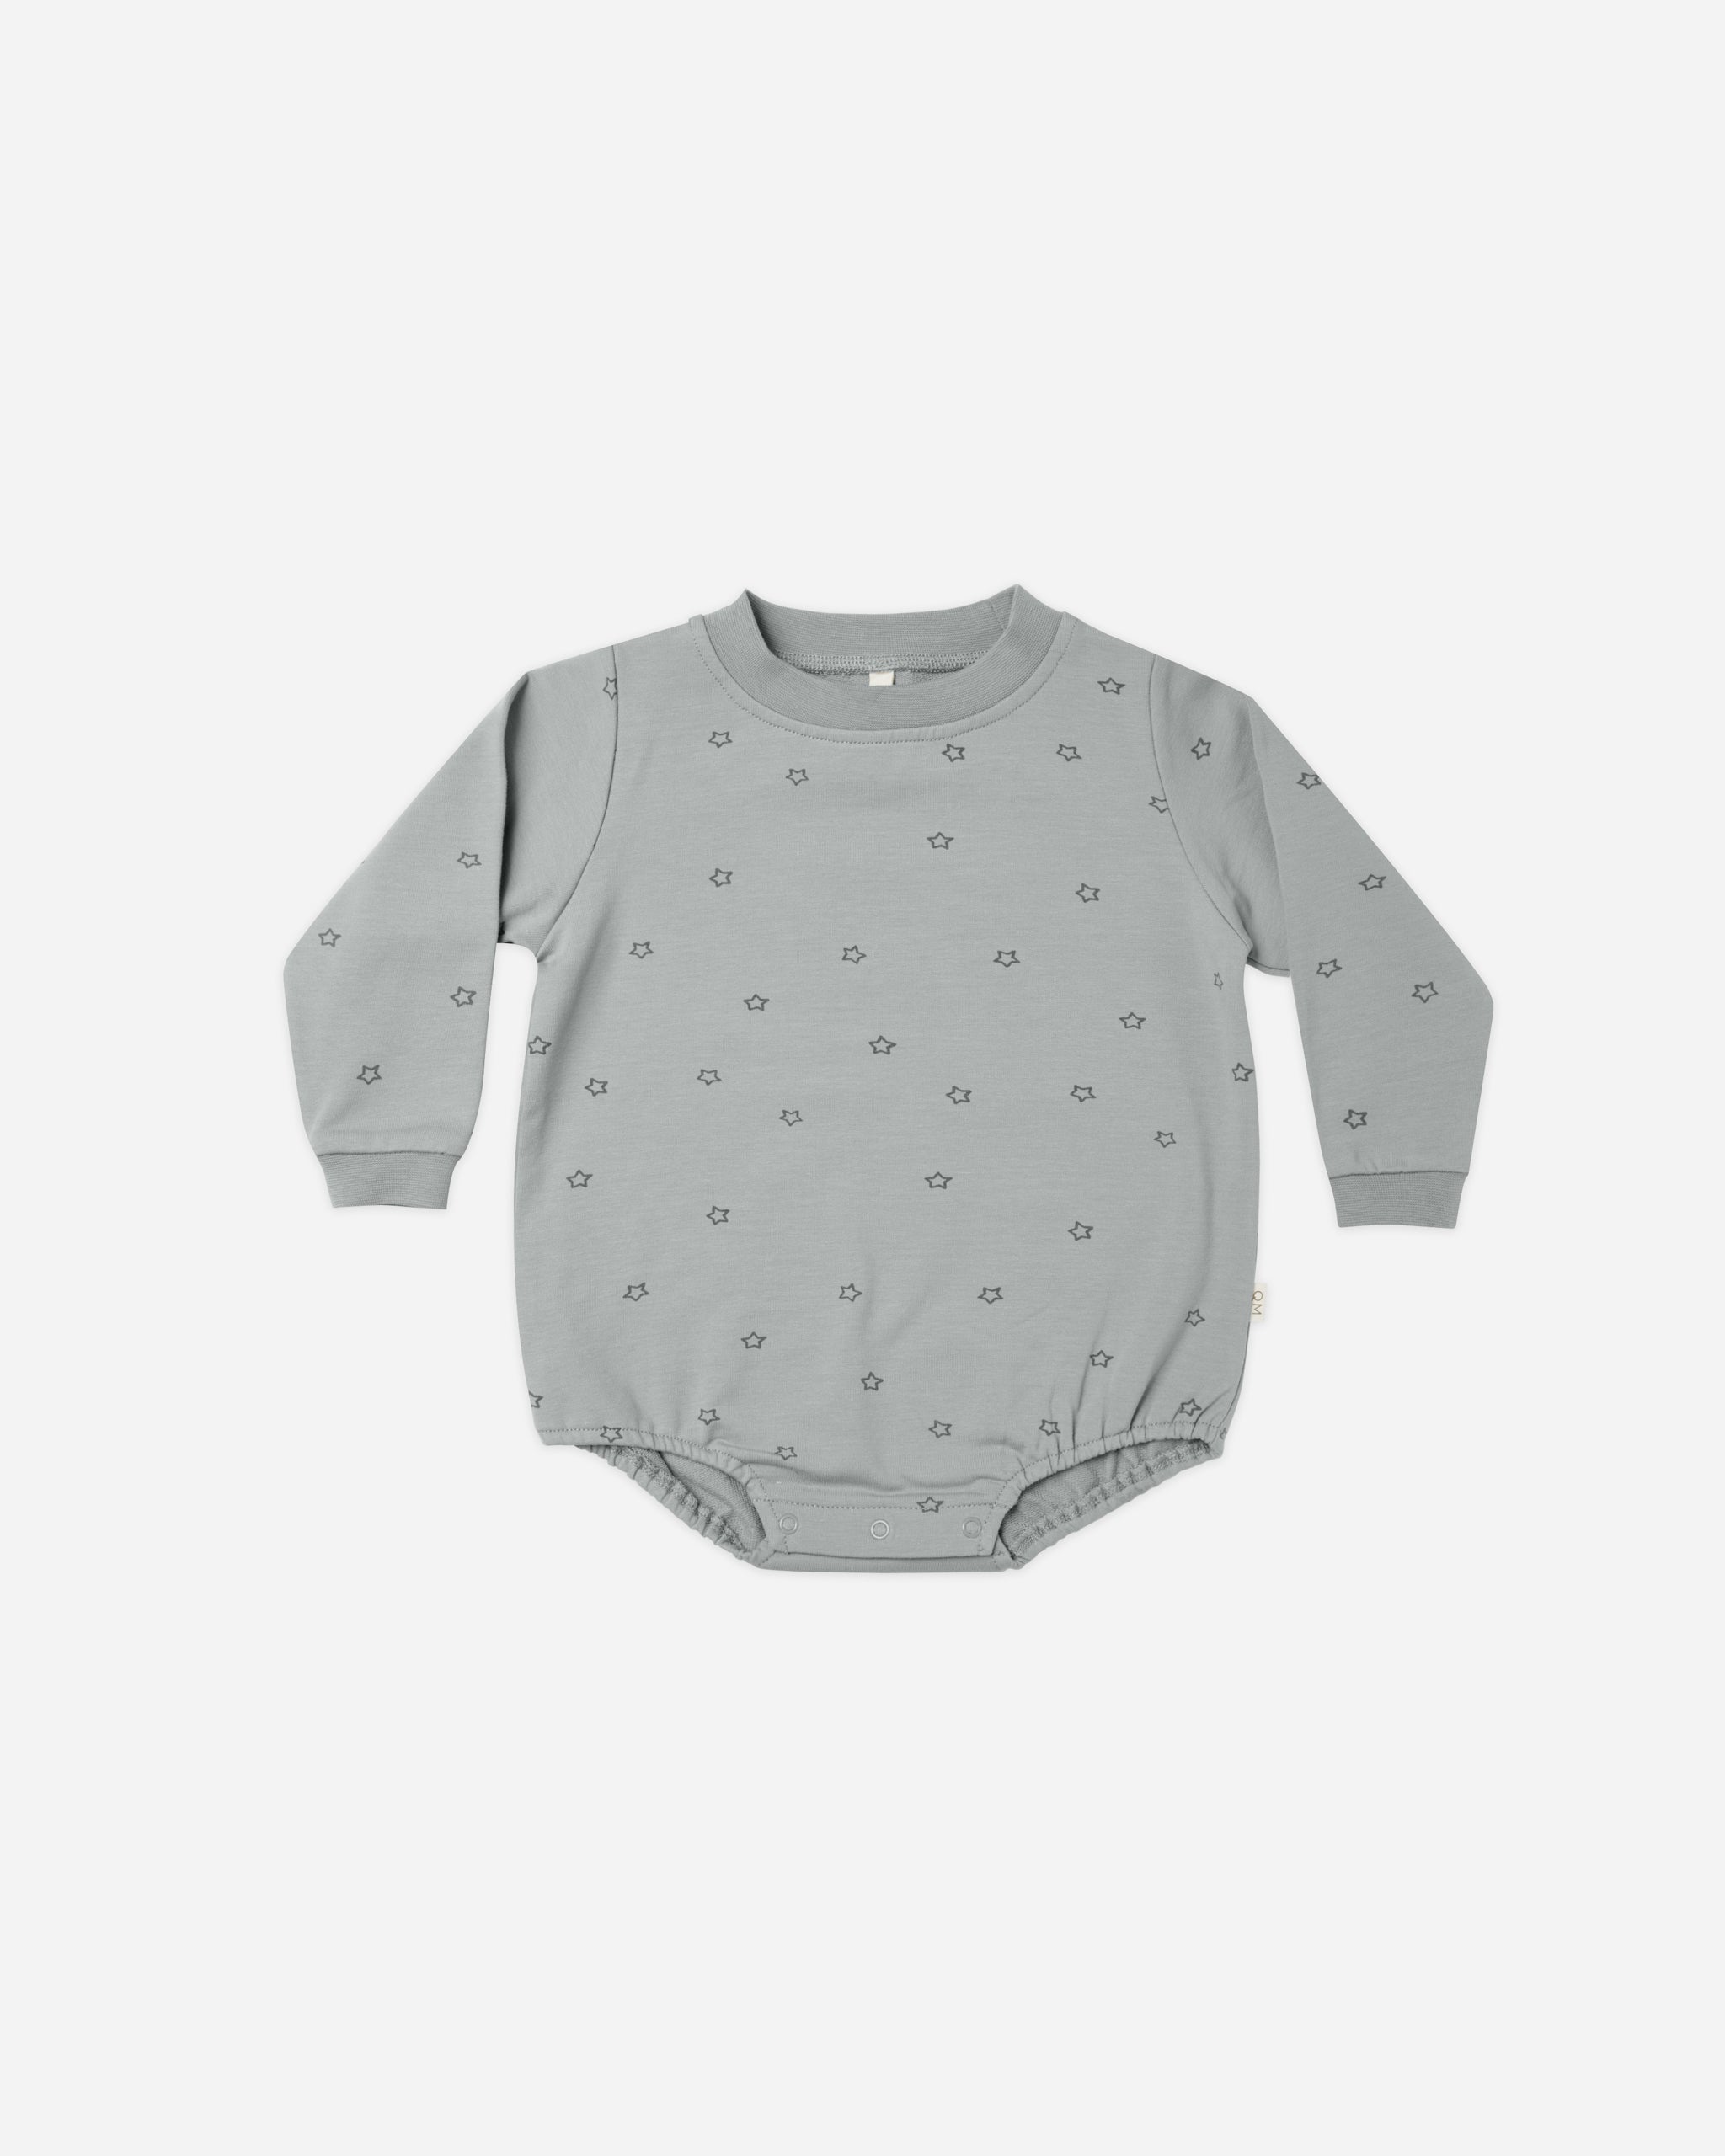 Crewneck Bubble Romper || Stars - Rylee + Cru | Kids Clothes | Trendy Baby Clothes | Modern Infant Outfits |